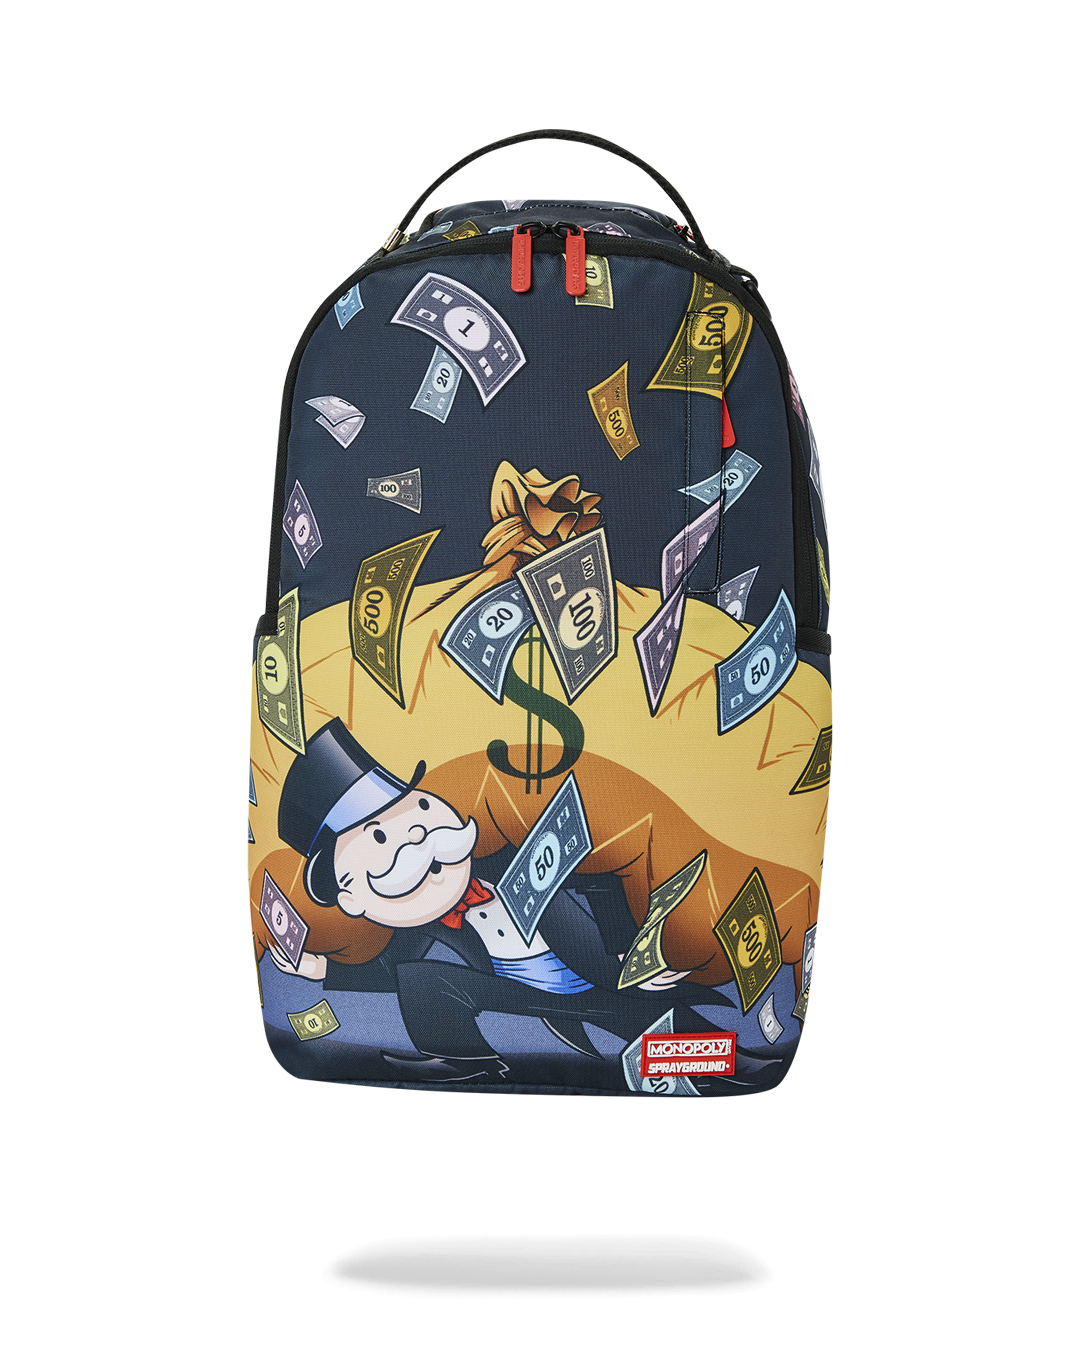 Sprayground - Monopoly Heavybags Backpack - Clique Apparel